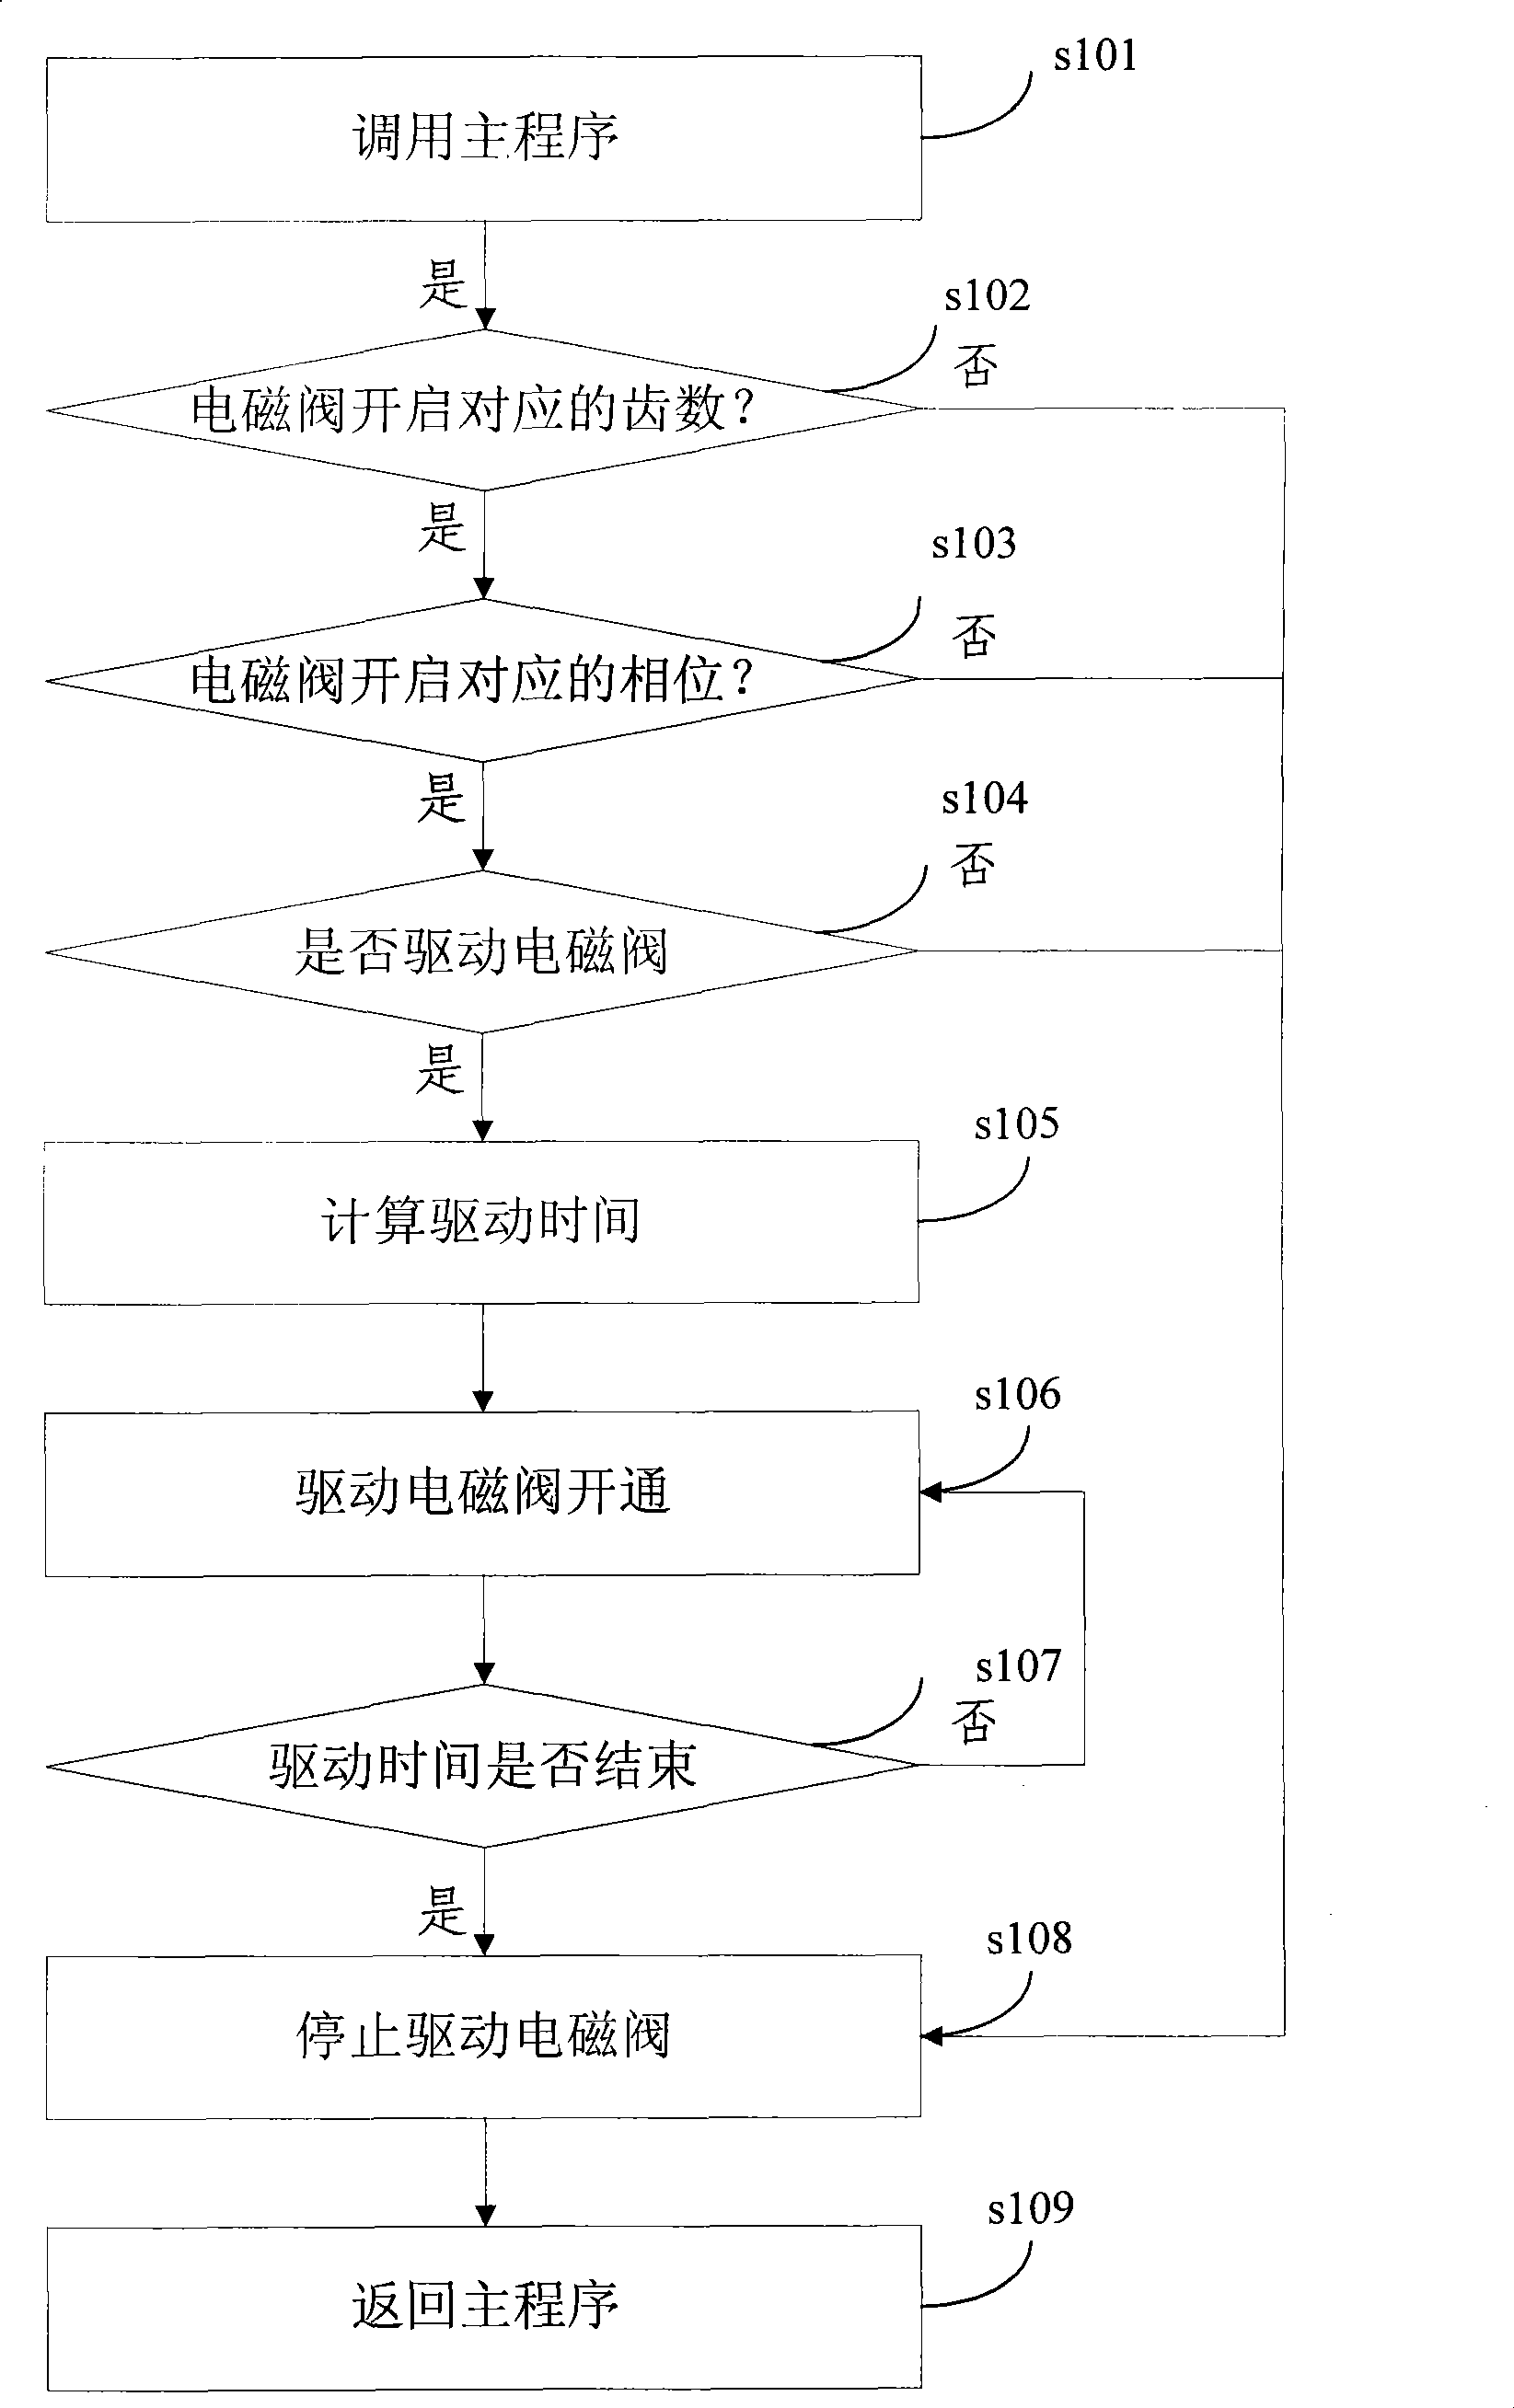 Idle speed control method for electric-controlled unit of motorcycle engine